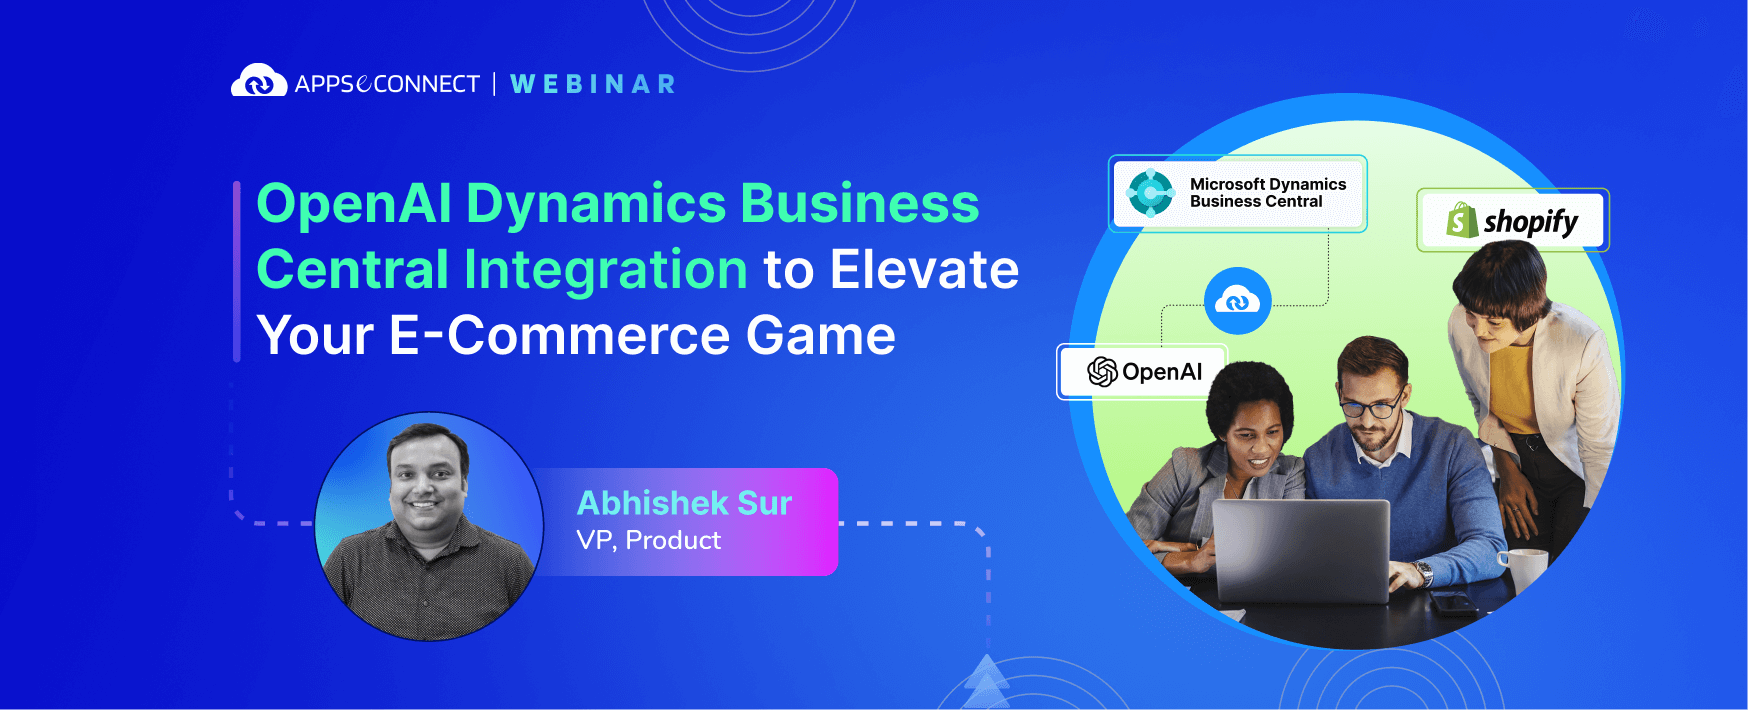 Webinar: OpenAI Integration for Dynamics Business Central to Elevate Your eCommerce Game